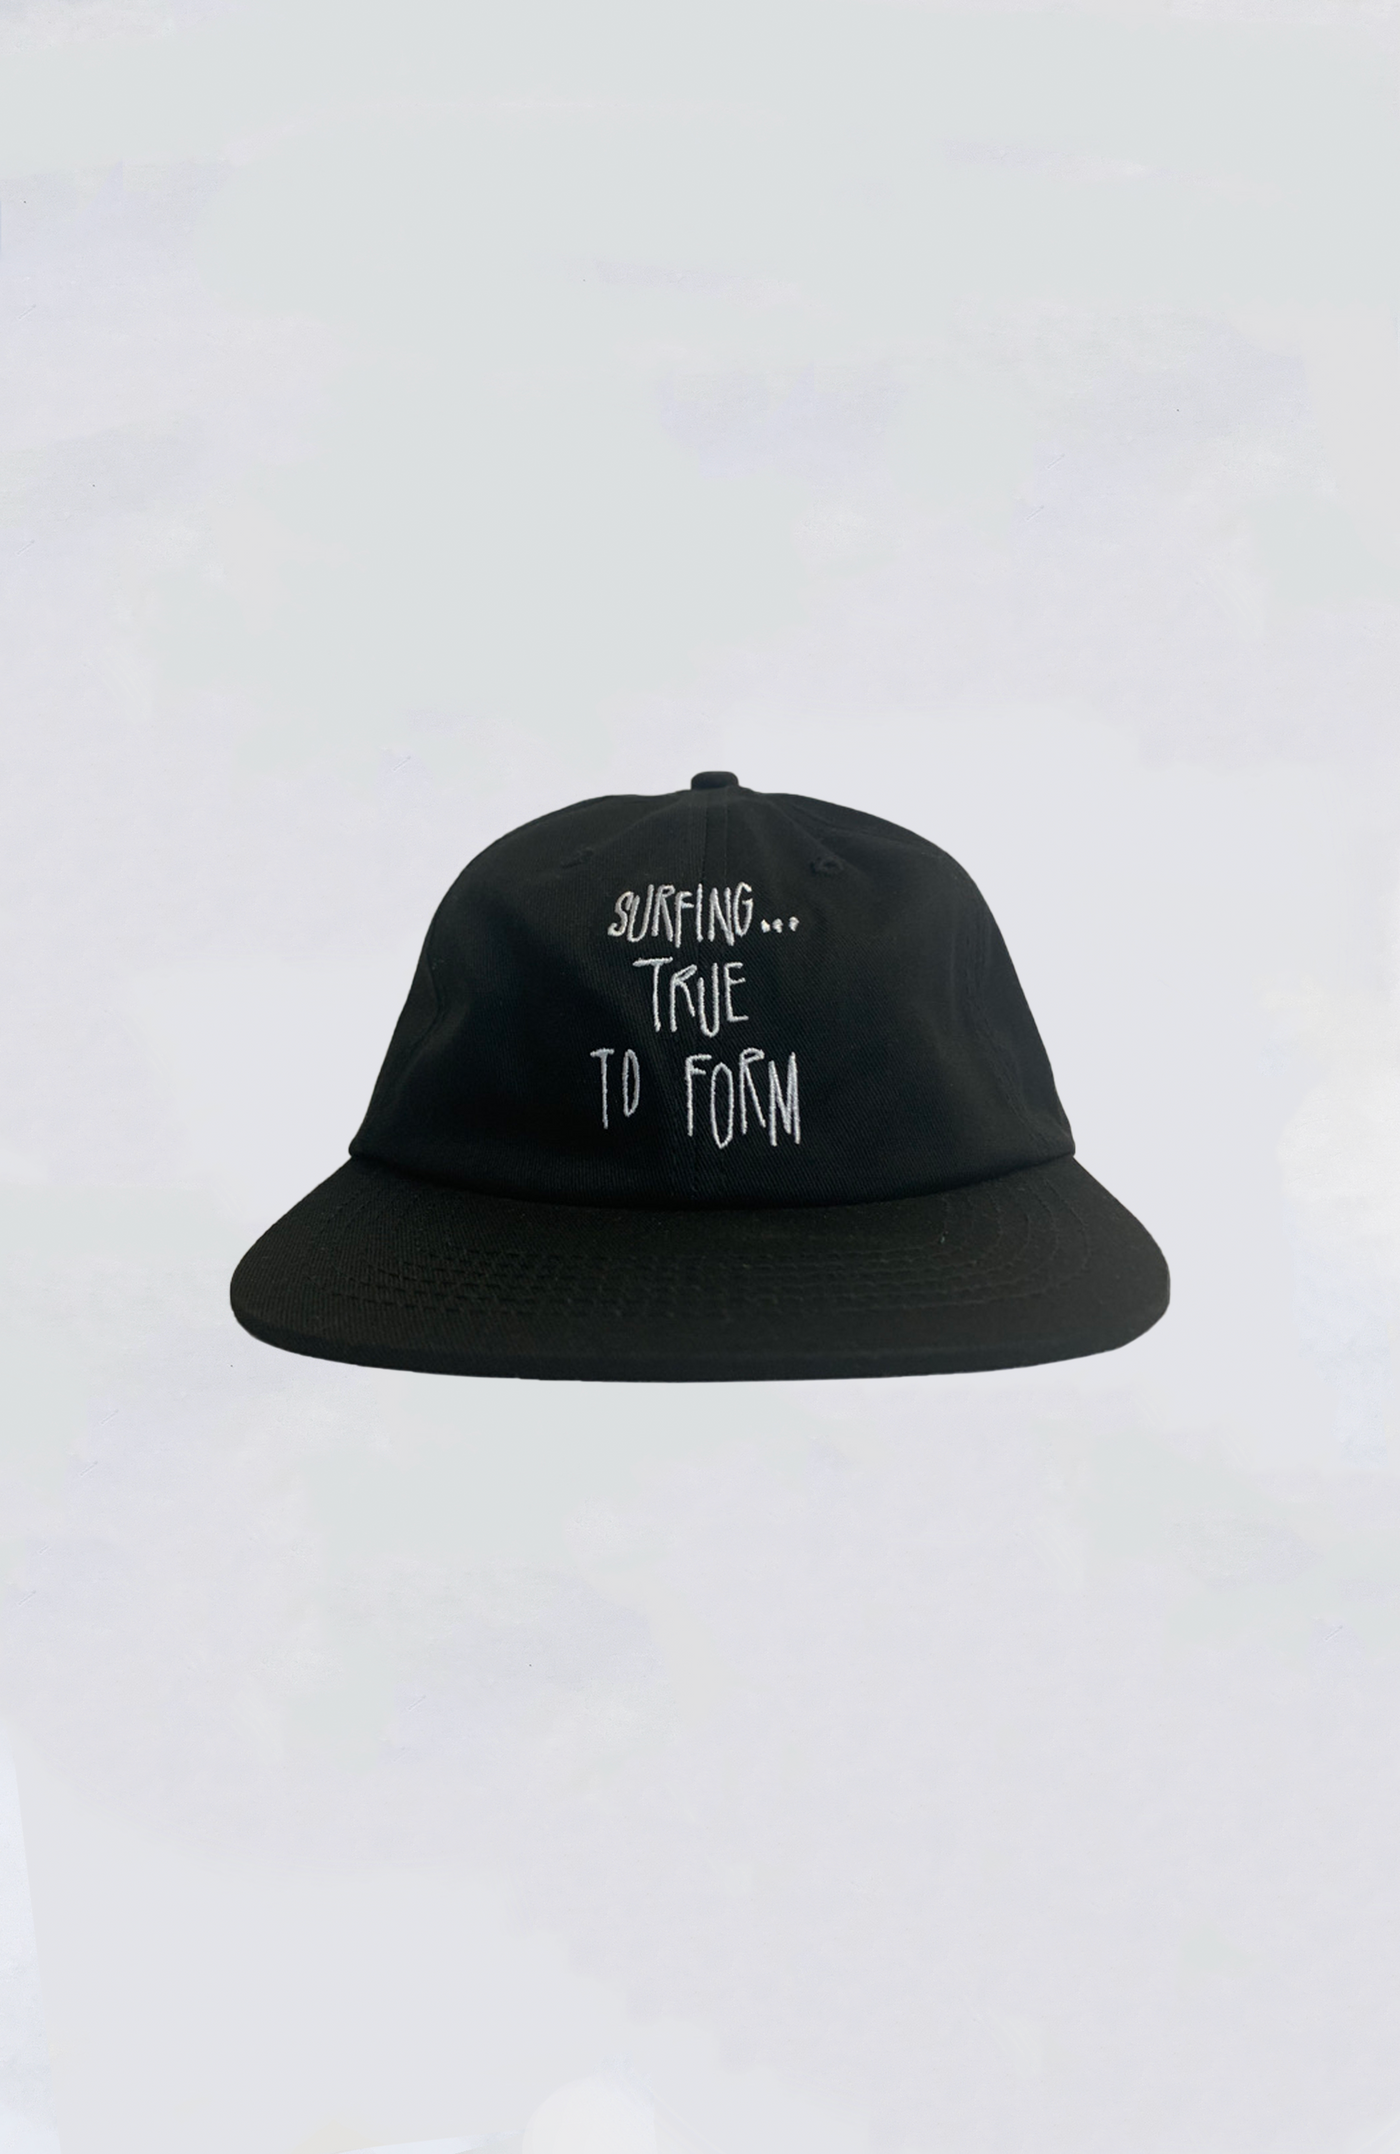 Island Snow Hawaii Unstructured Snapback Hat - IS True to Form